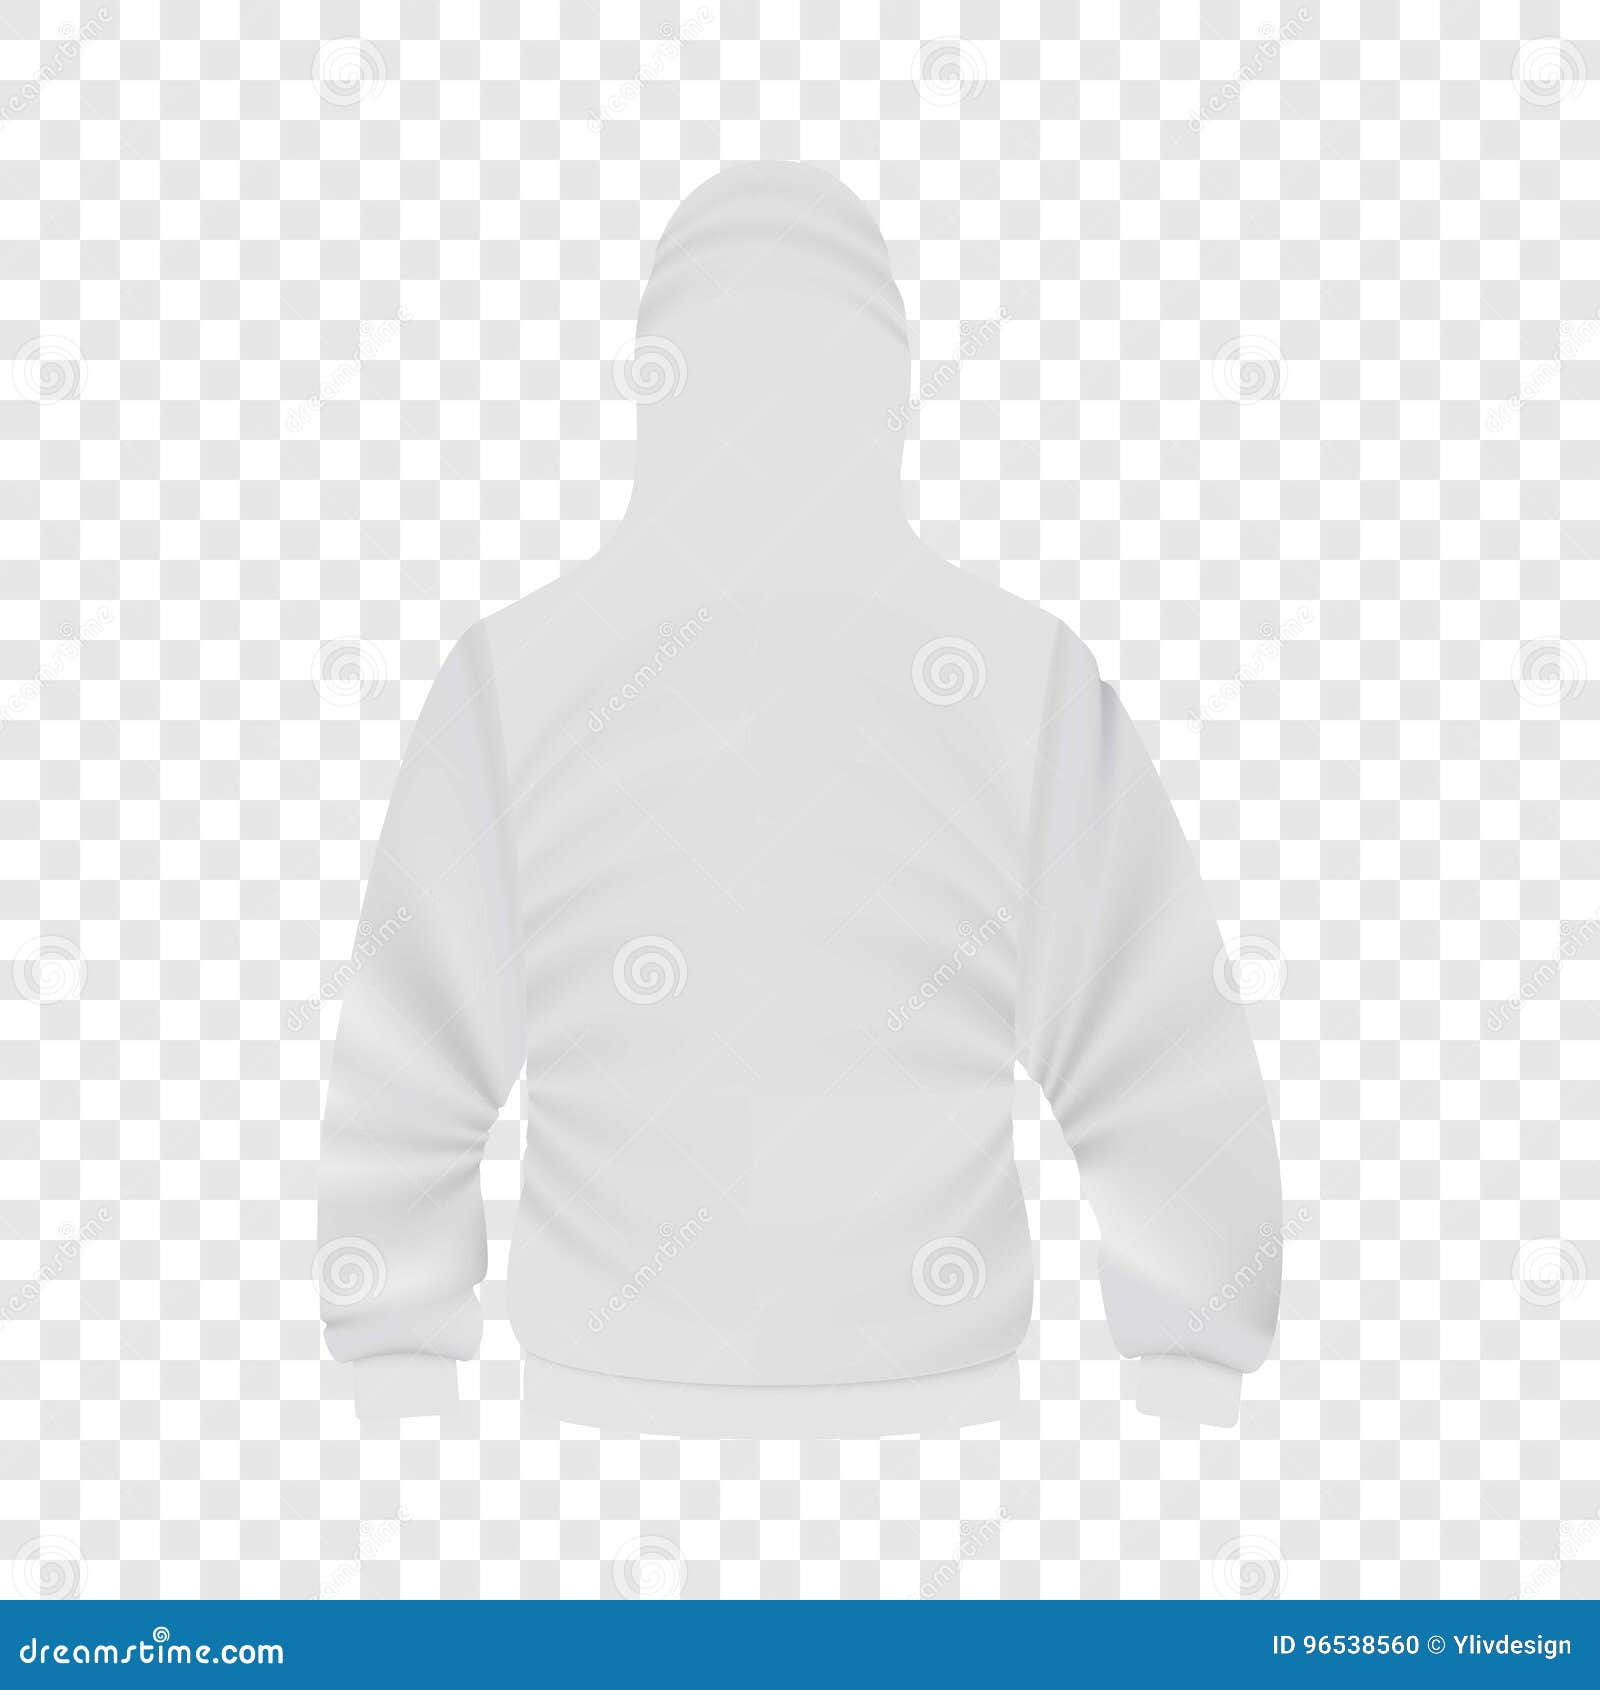 Download Back Of White Hoodie Mockup, Realistic Style Stock Vector - Illustration of back, female: 96538560